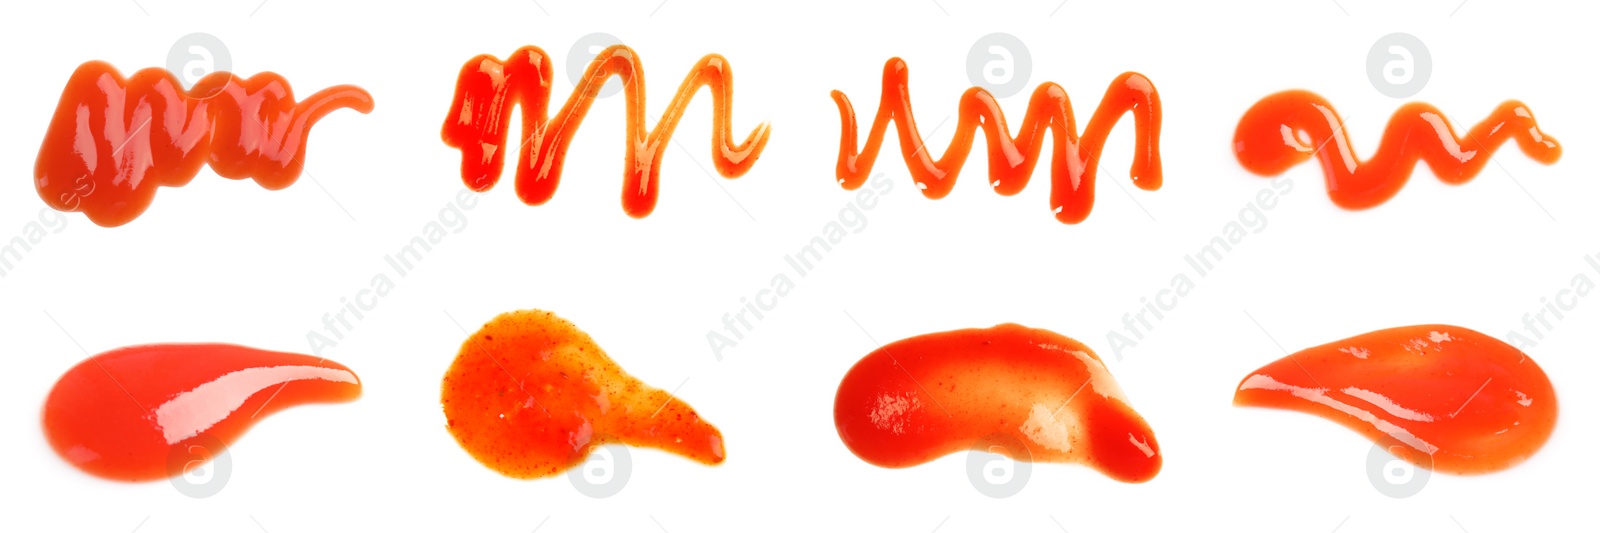 Image of Set of delicious tomato sauce on white background, top view. Banner design